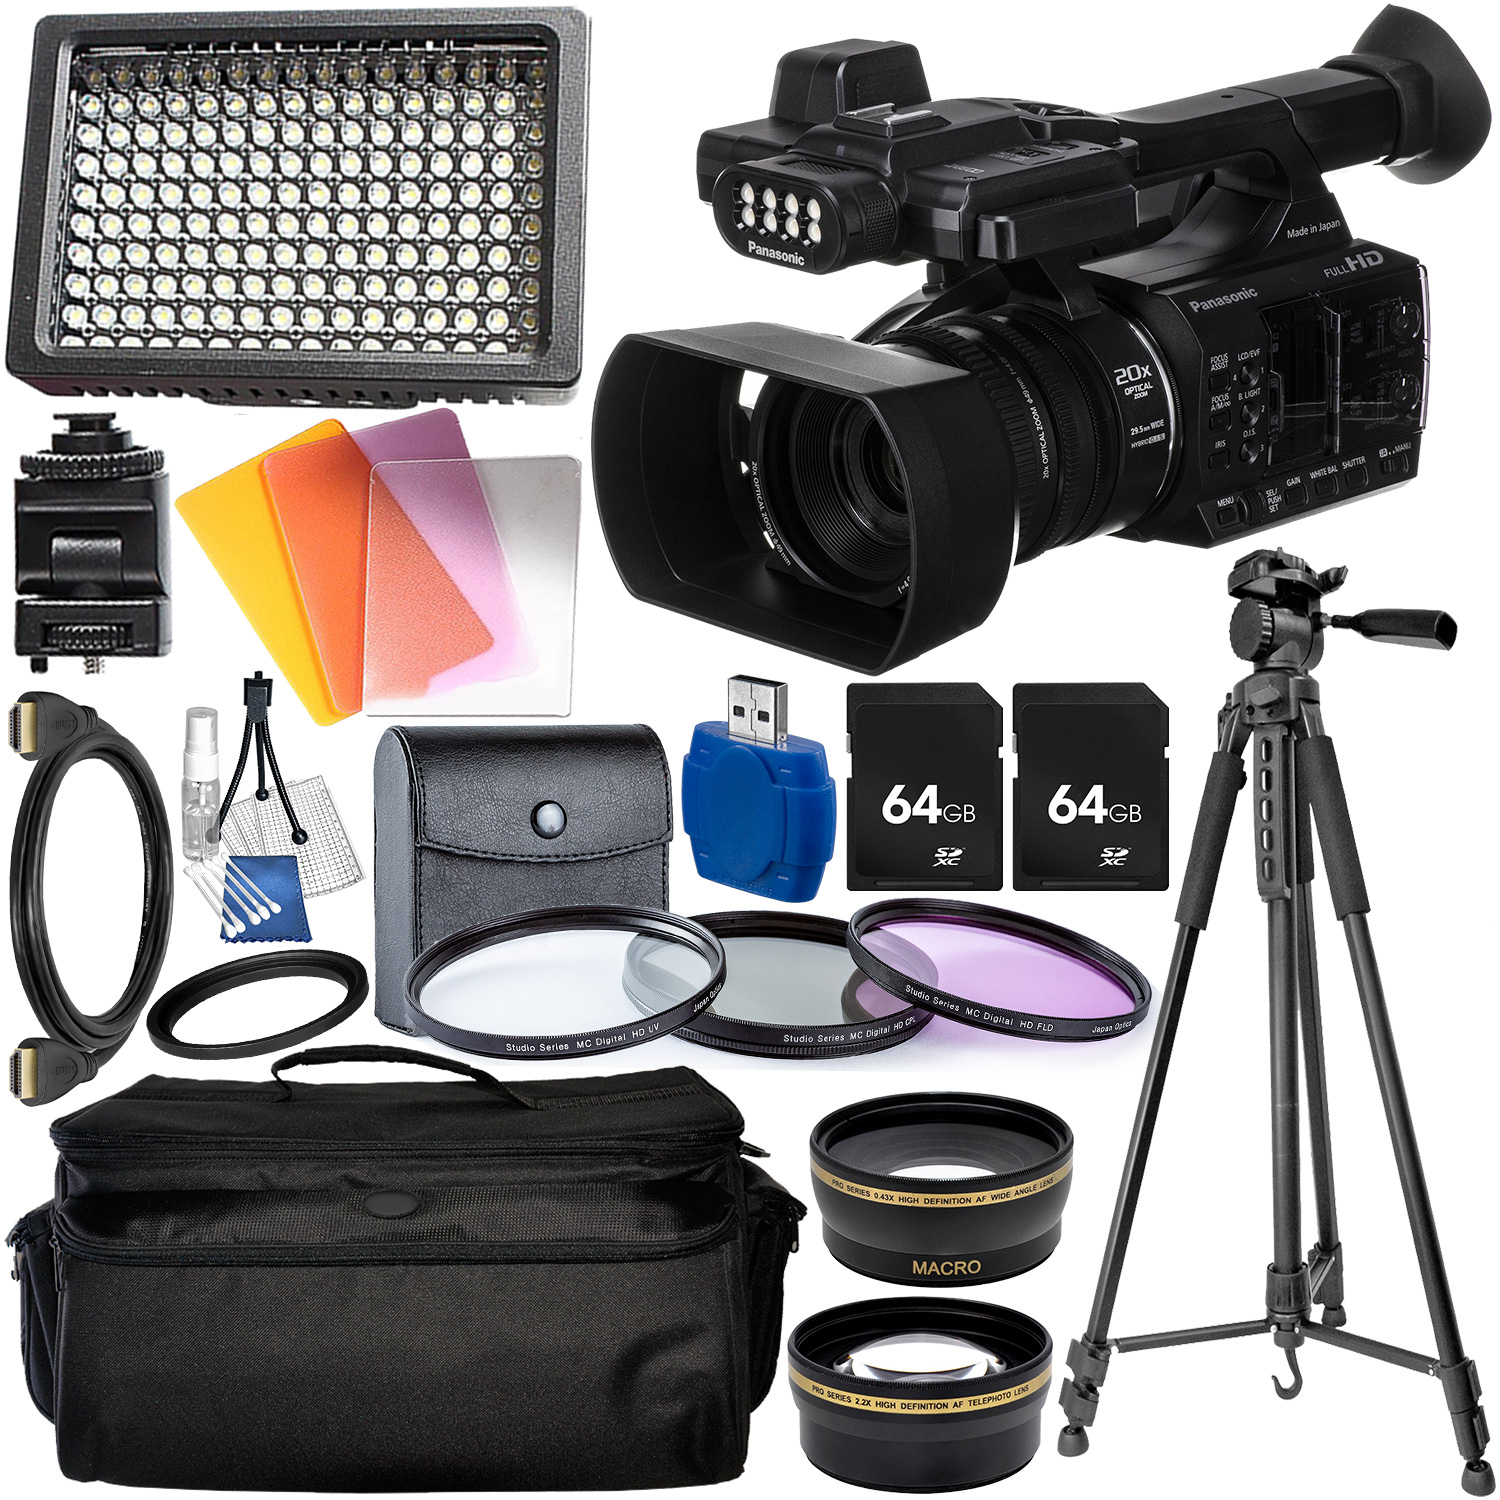 Panasonic AG-AC30 Full HD Camcorder with Built-In LED Light & Starter Accessory Bundle